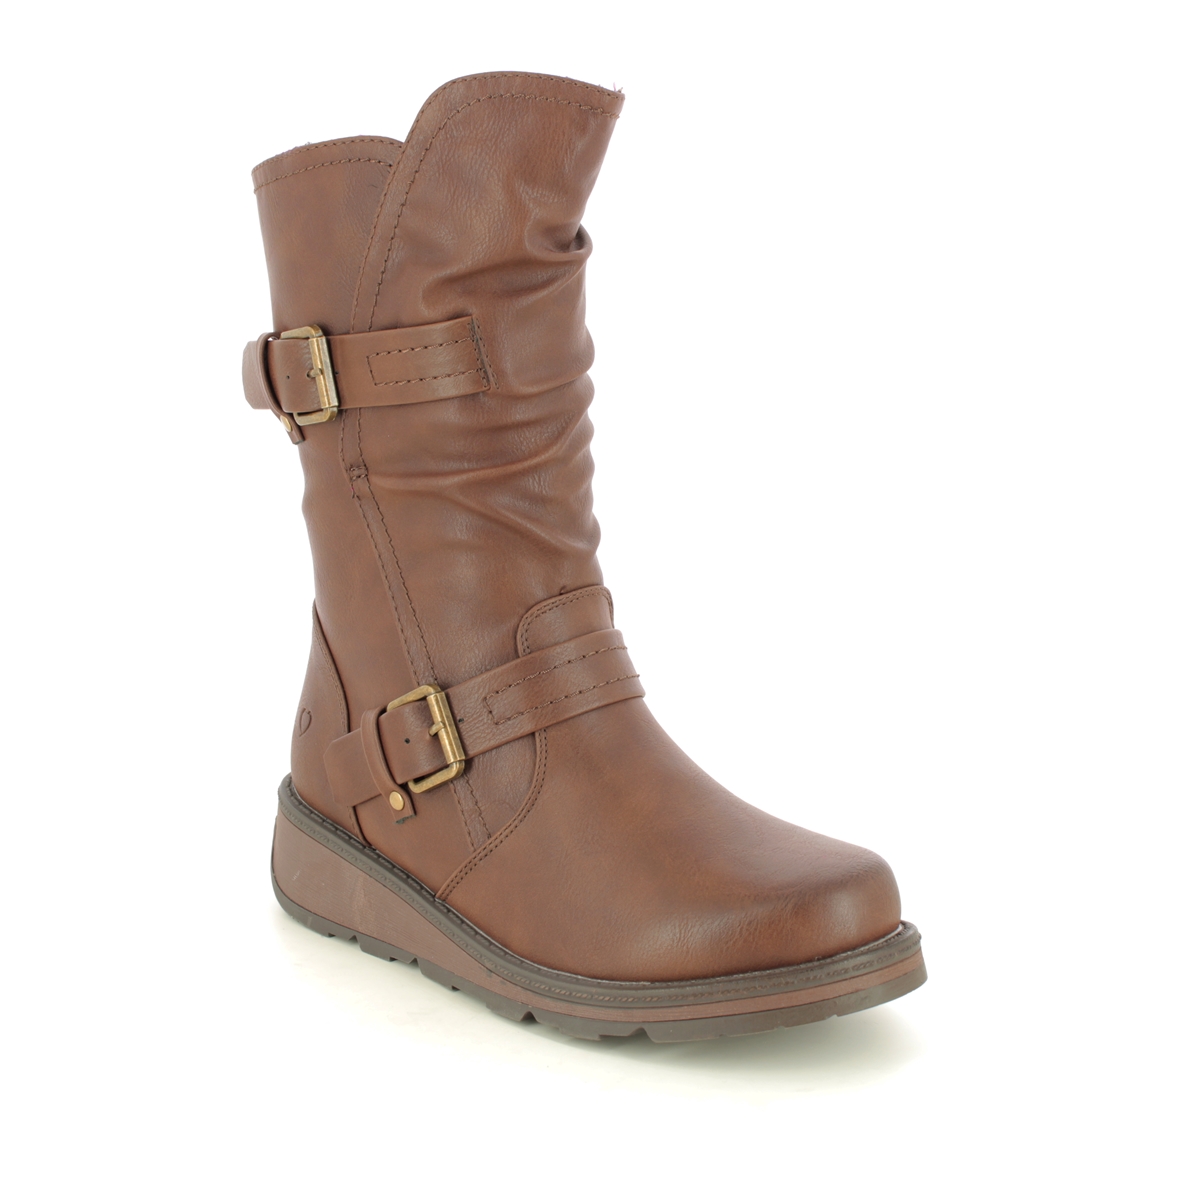 Heavenly Feet Hannah 3 Chocolate brown Womens Mid Calf Boots 3004-22 in a Plain Man-made in Size 5